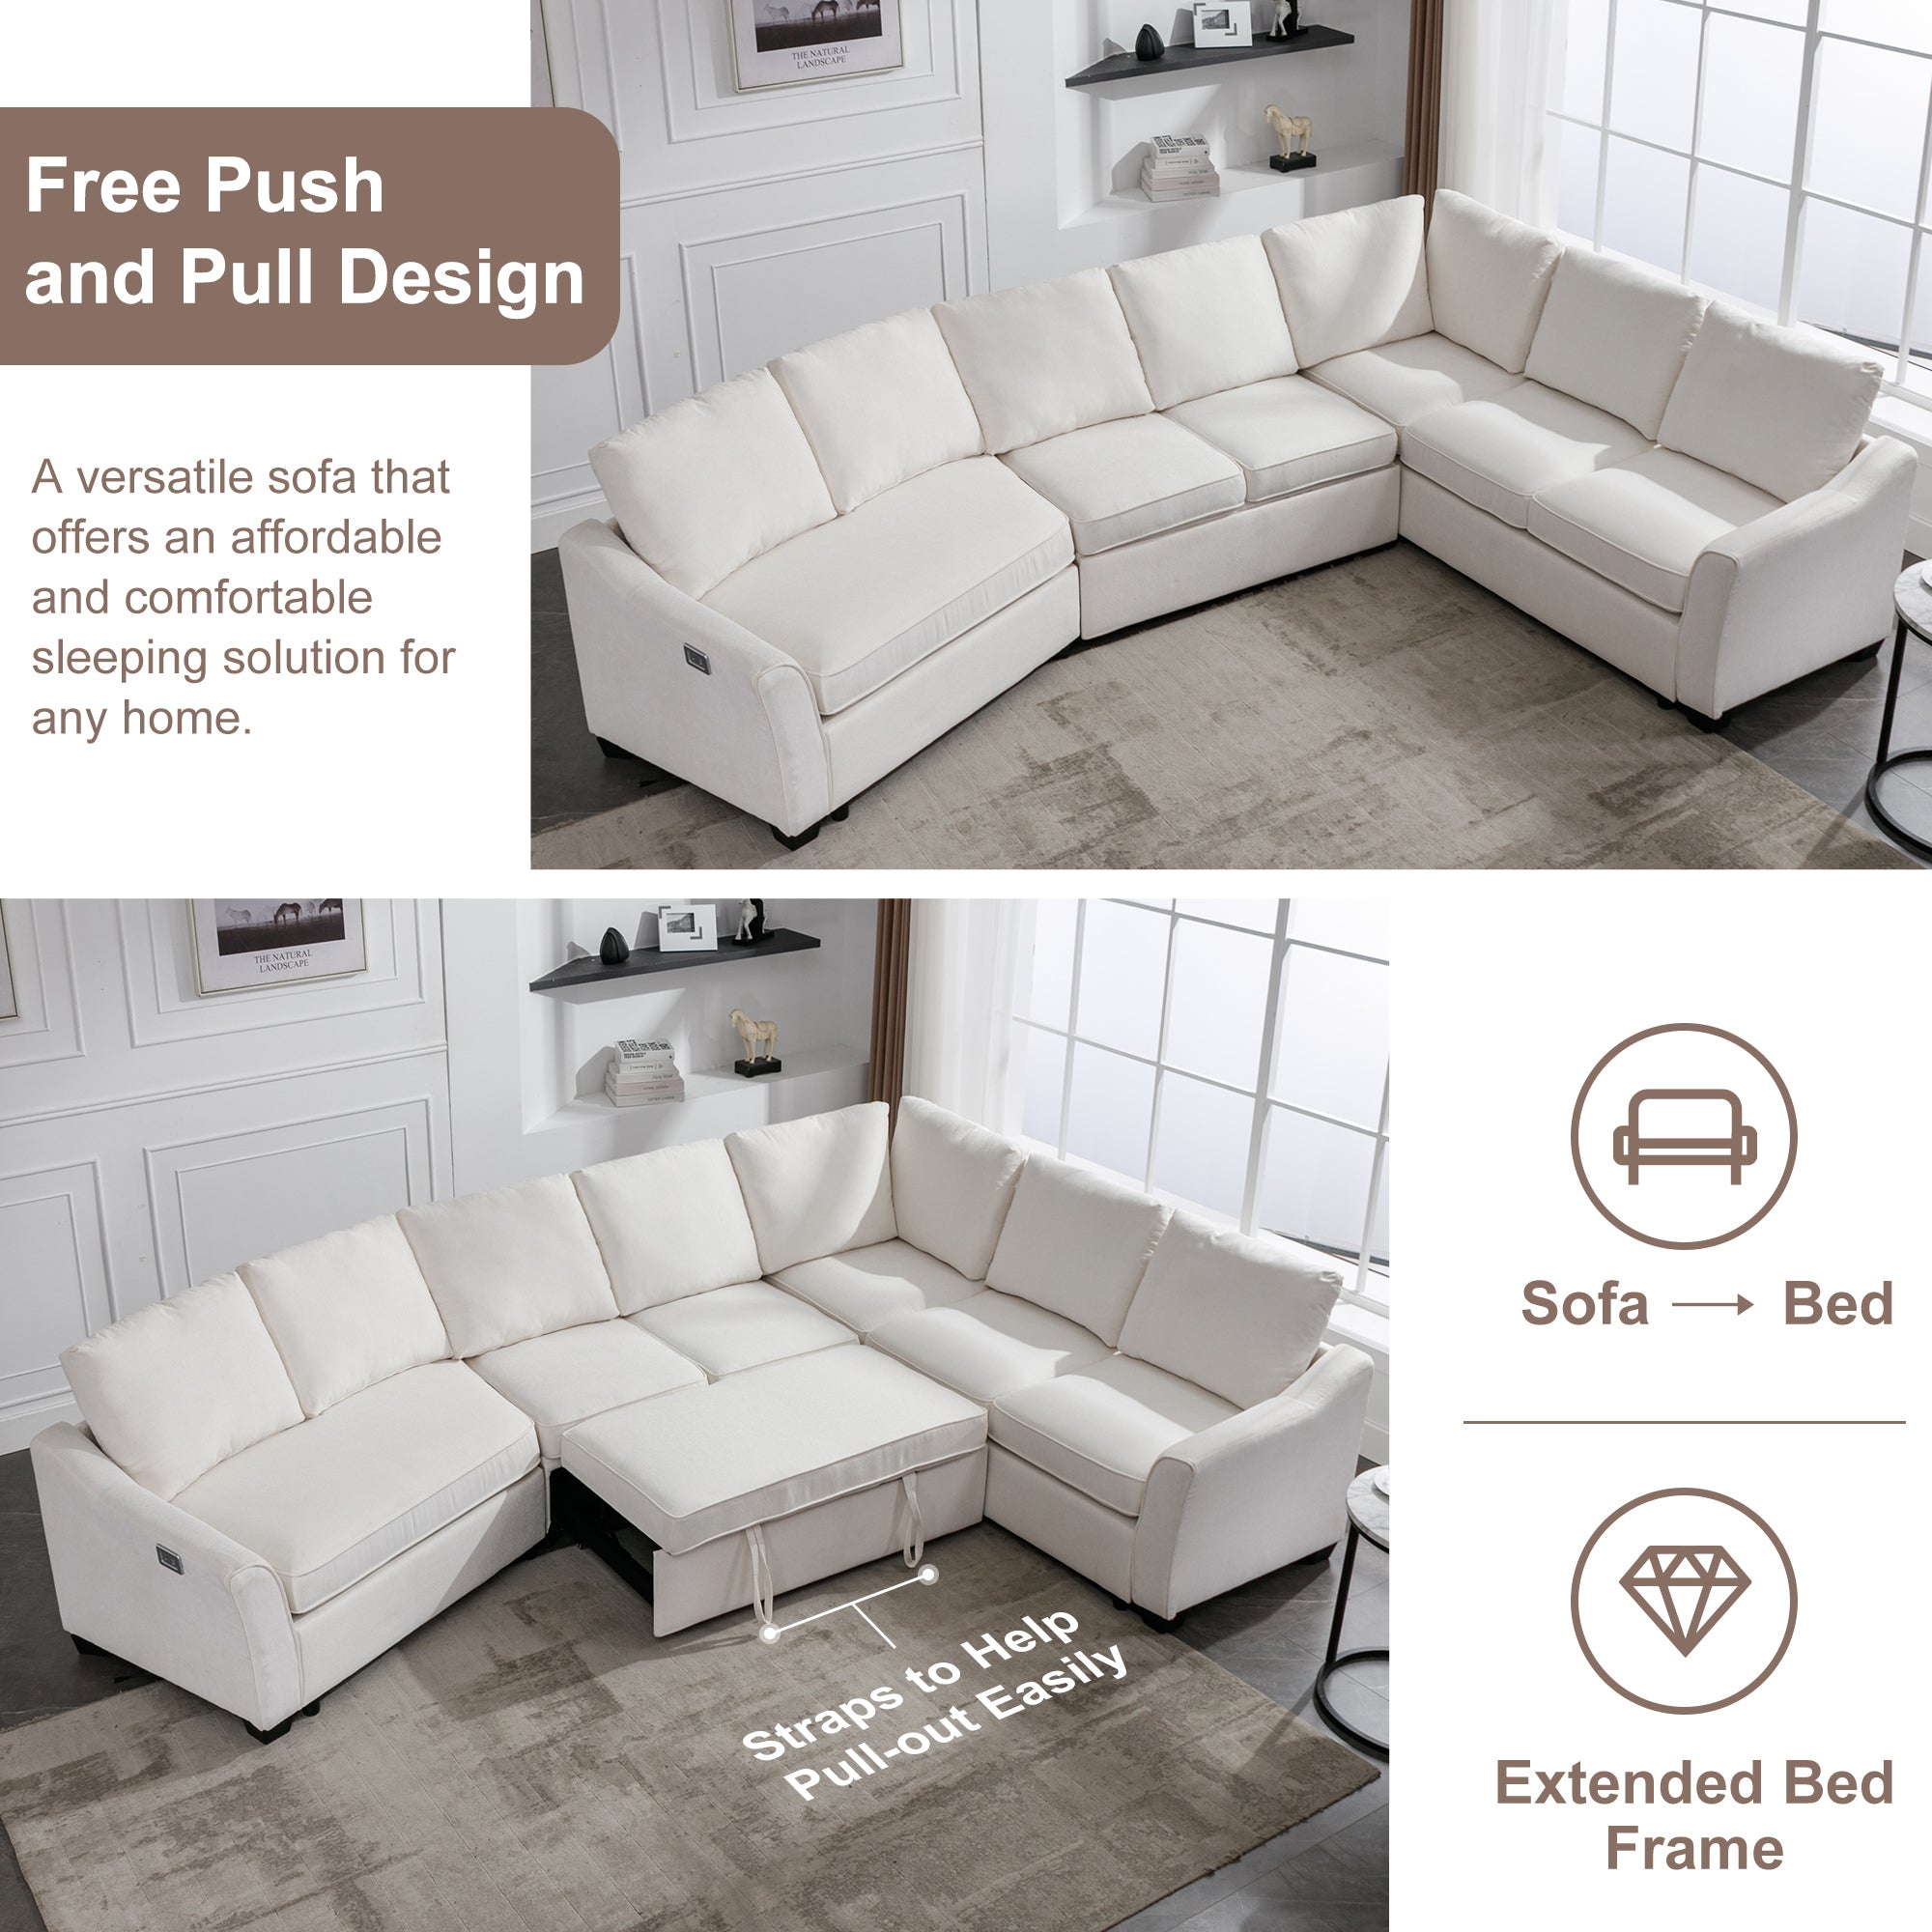 129.5" Beige Chenille L Shaped Sectional Sleeper Sofa w/ USB-Stationary Sectionals-American Furniture Outlet